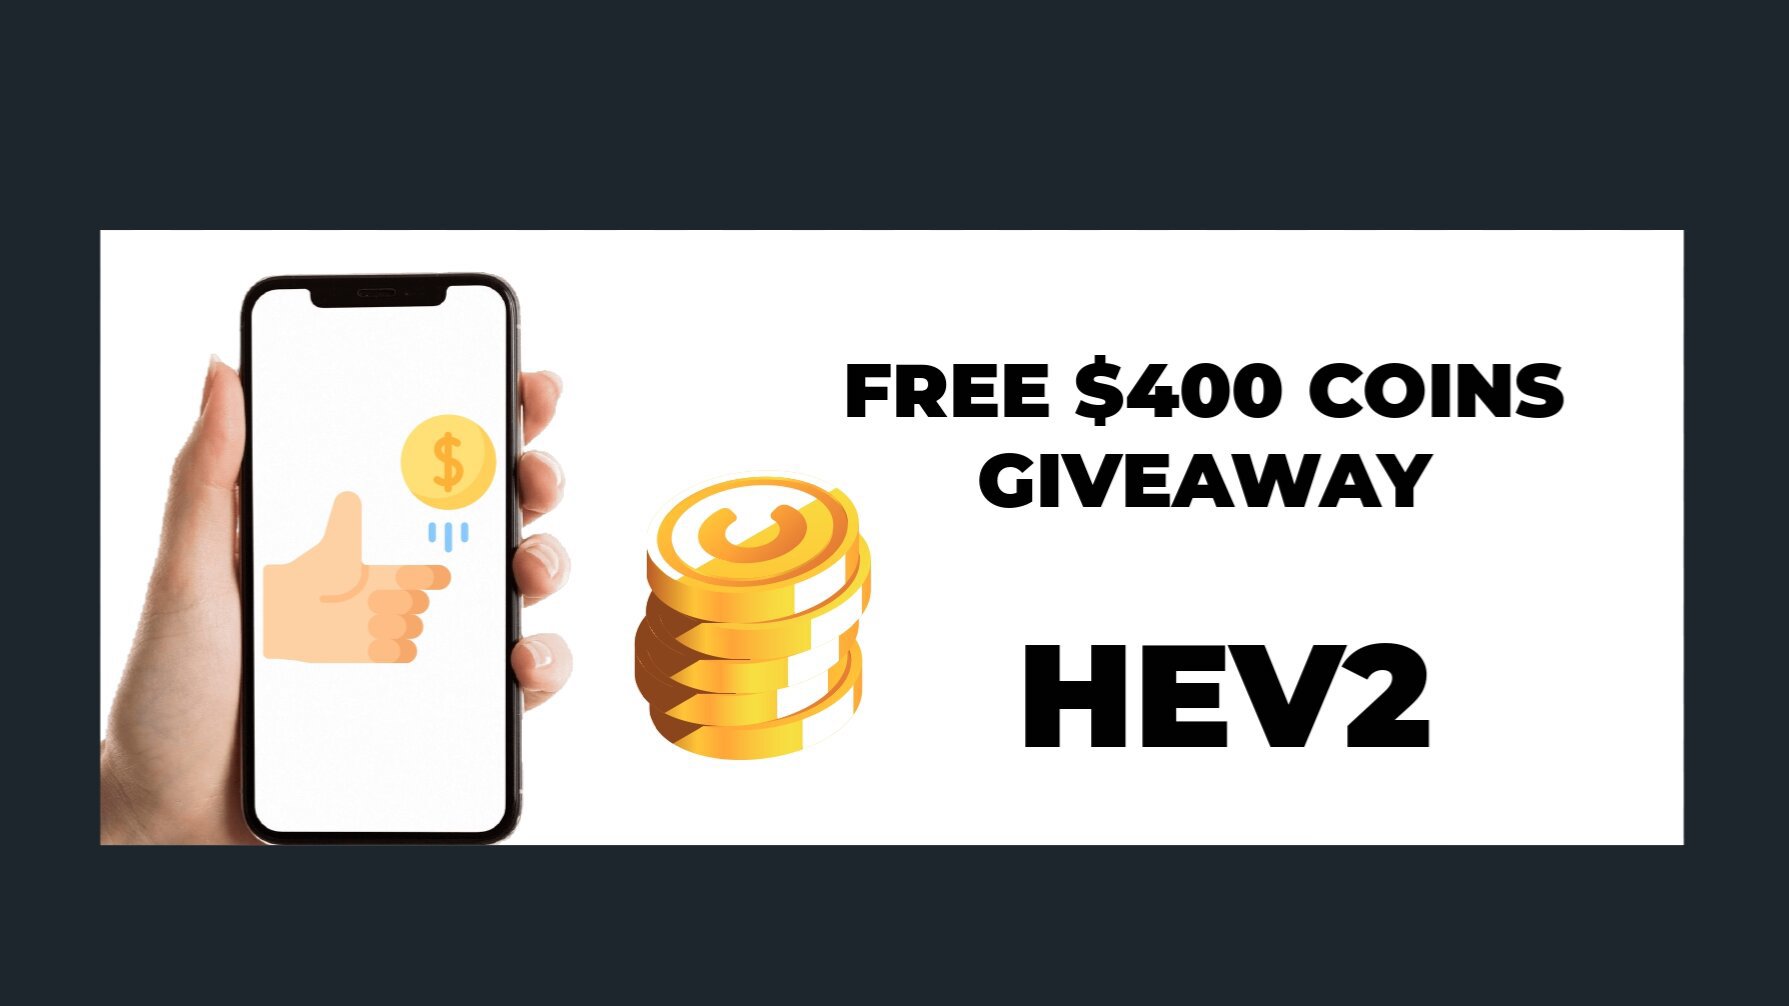 FREE GIVEAWAY $400 HEV2 Coins For Everyone